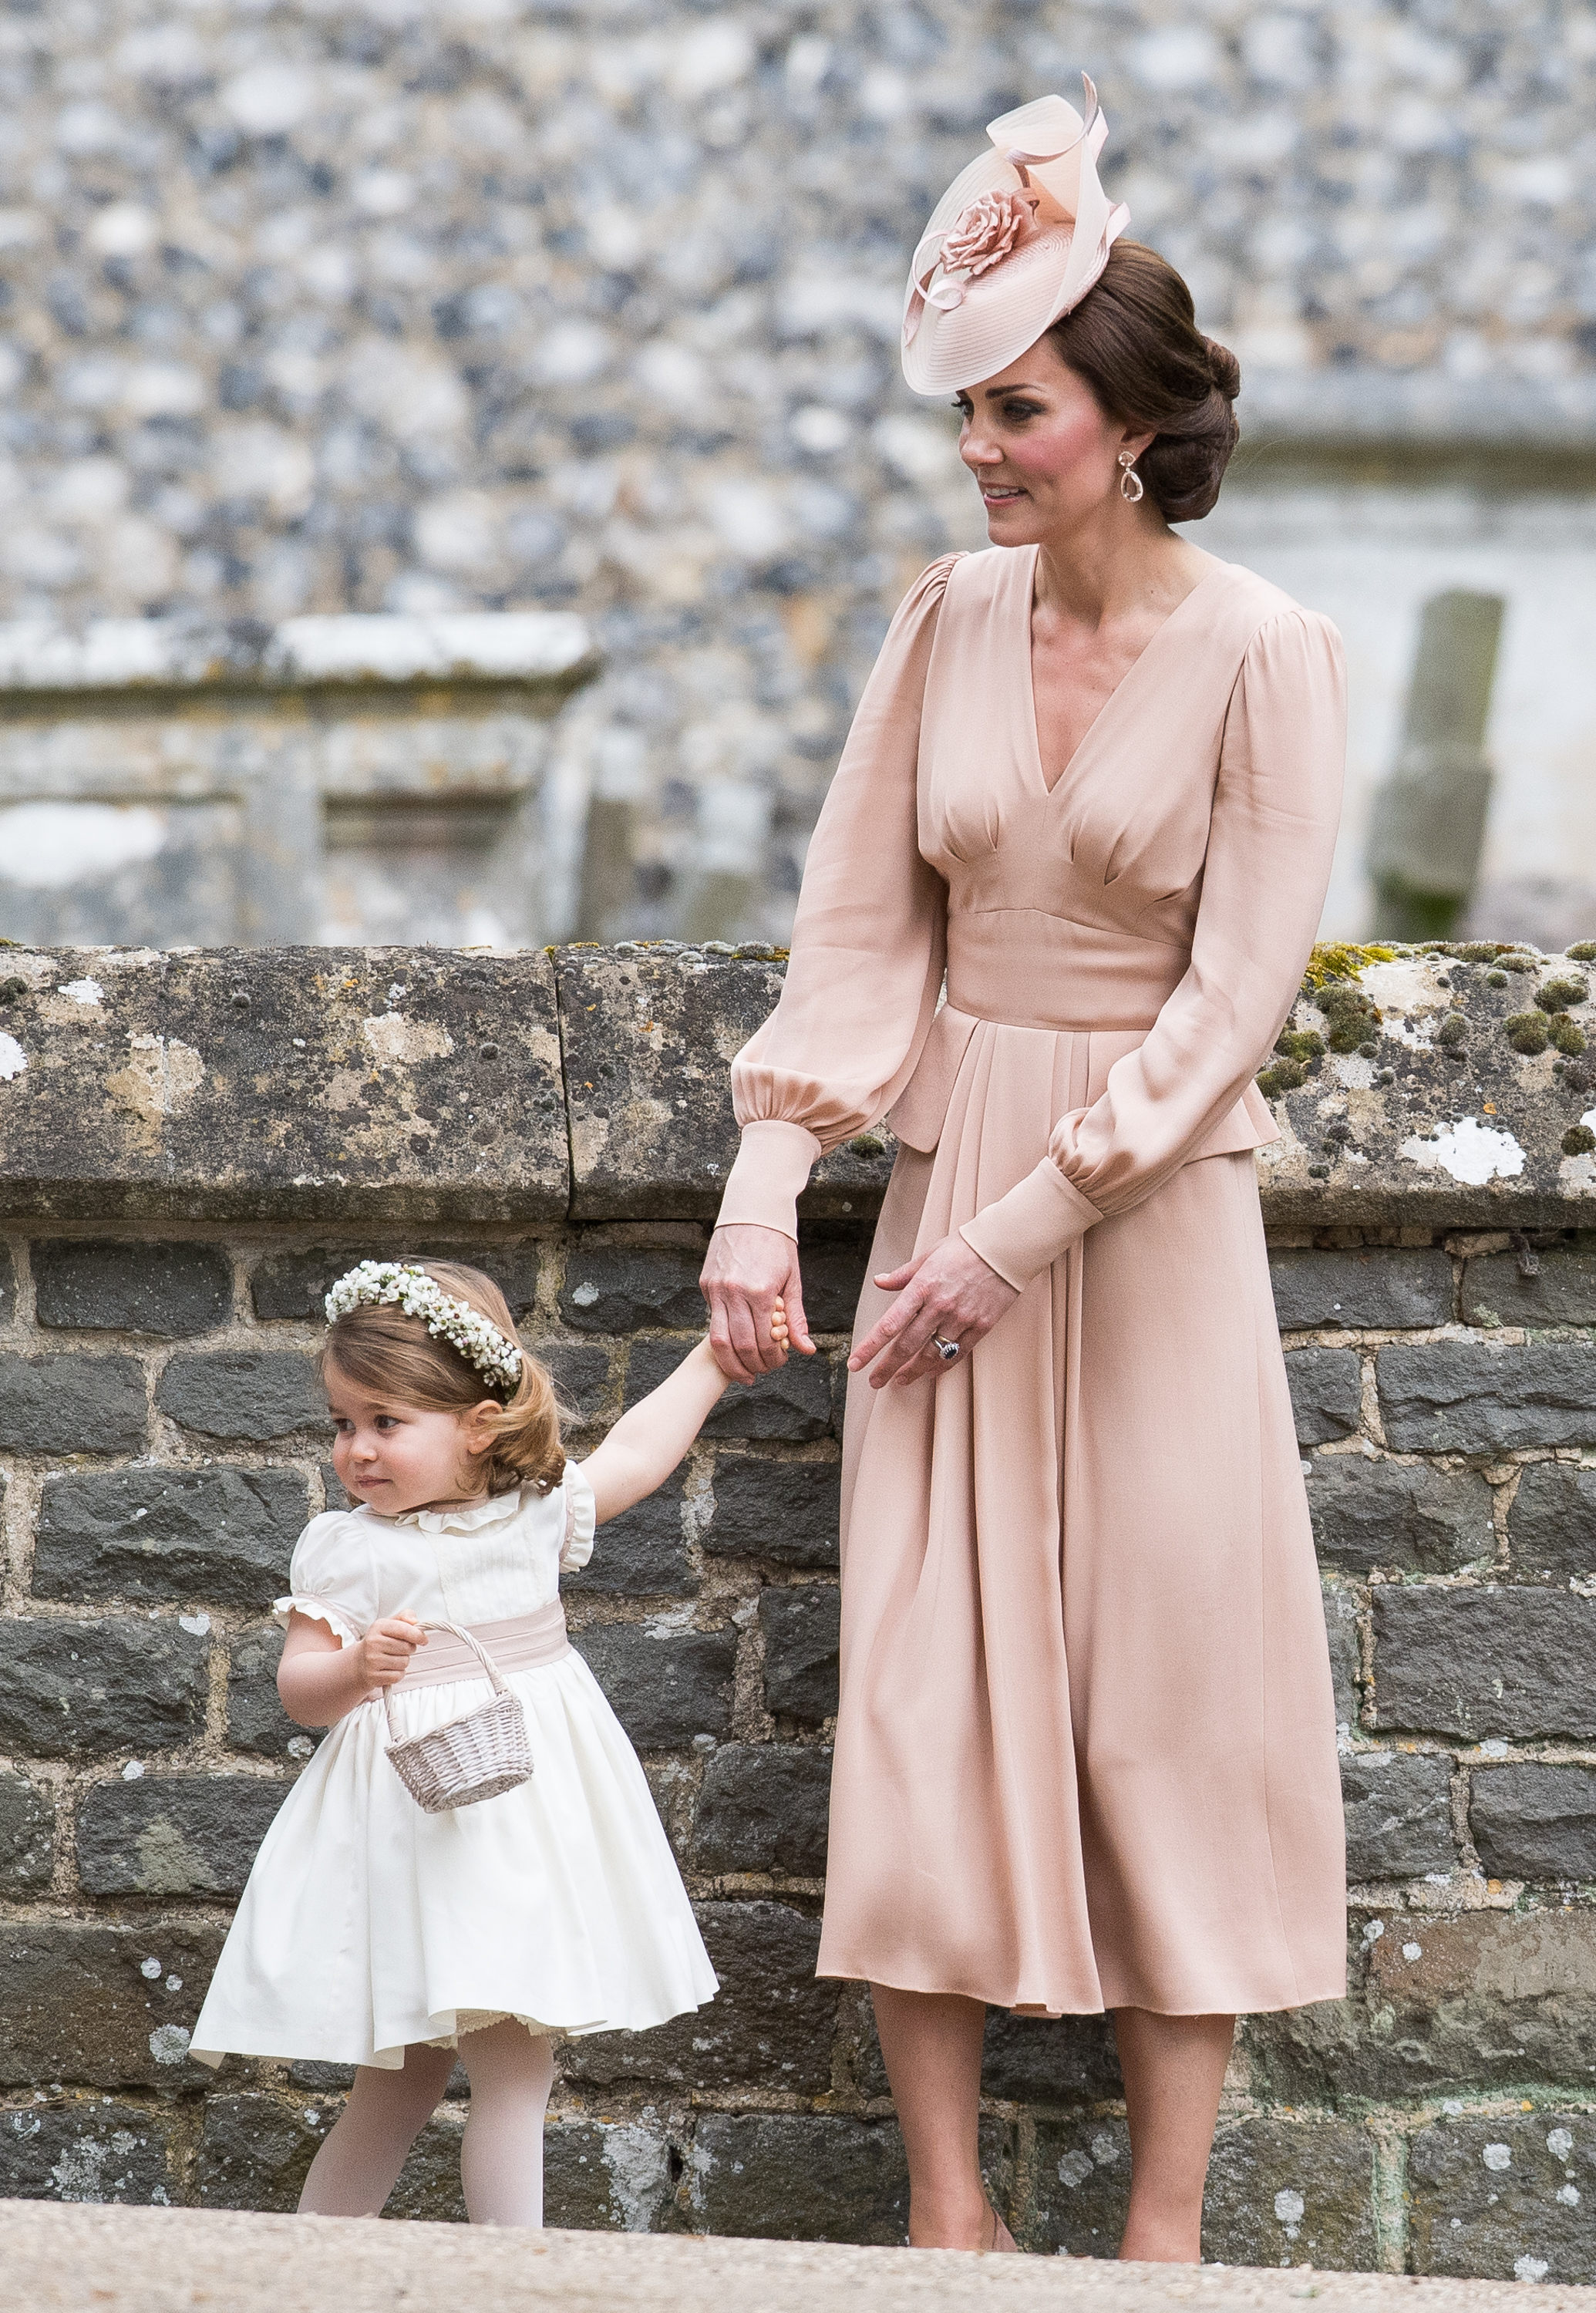 Princess Charlotte of Cambridge, bridesmaid and Catherine, Duchess of Cambridge attend the wedding Of Pippa Middleton and James Matthews at St Mark's Church on May 20, 2017 in Englefield Green, England.